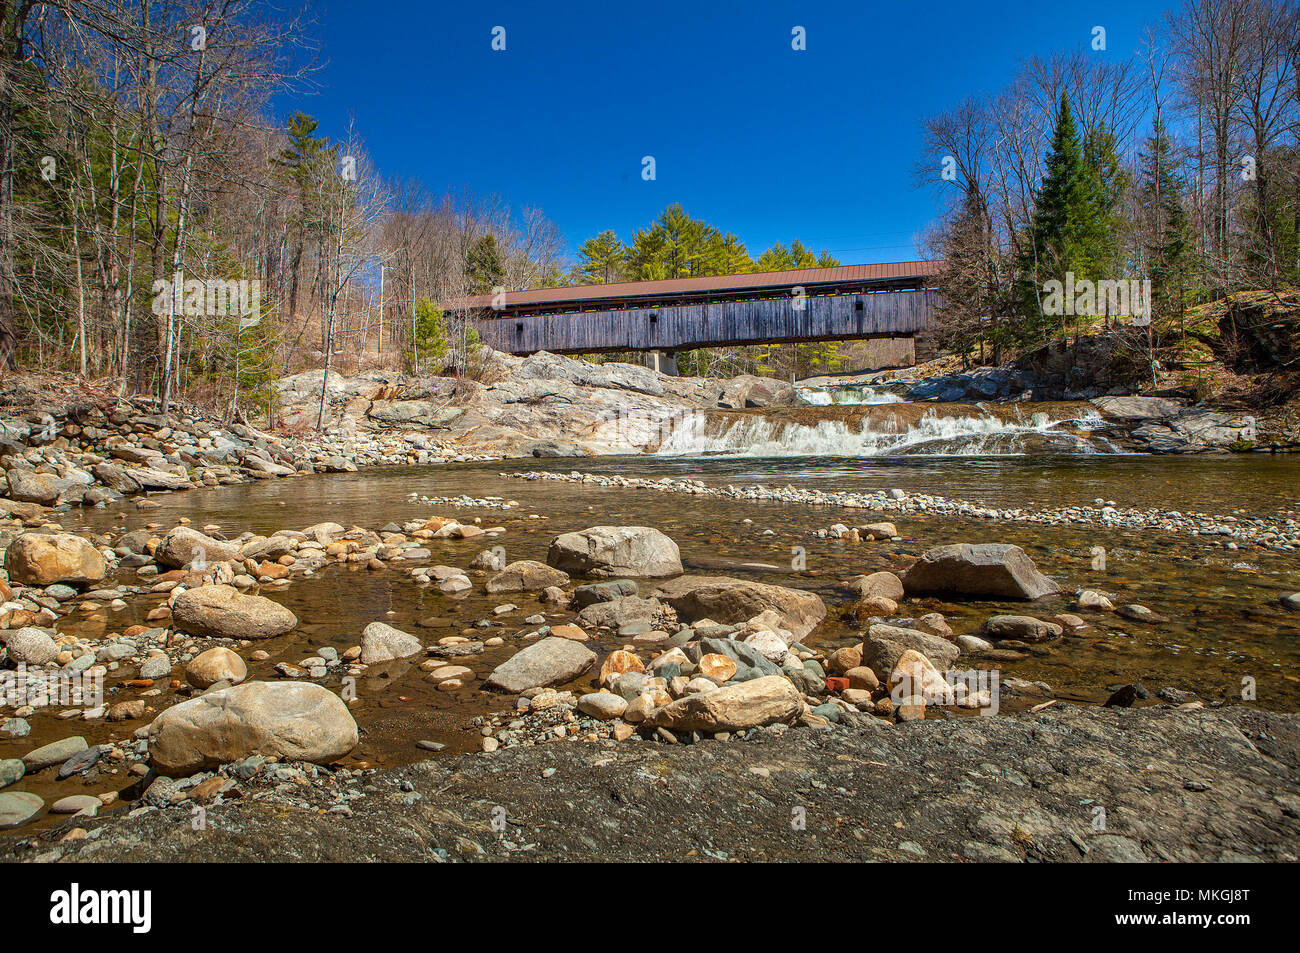 The Swiftwater at Bath, NH covered bridge spans the Wild Ammonoosuc River,  a favorite summer swimming hole and gold prospecting site. Stock Photo